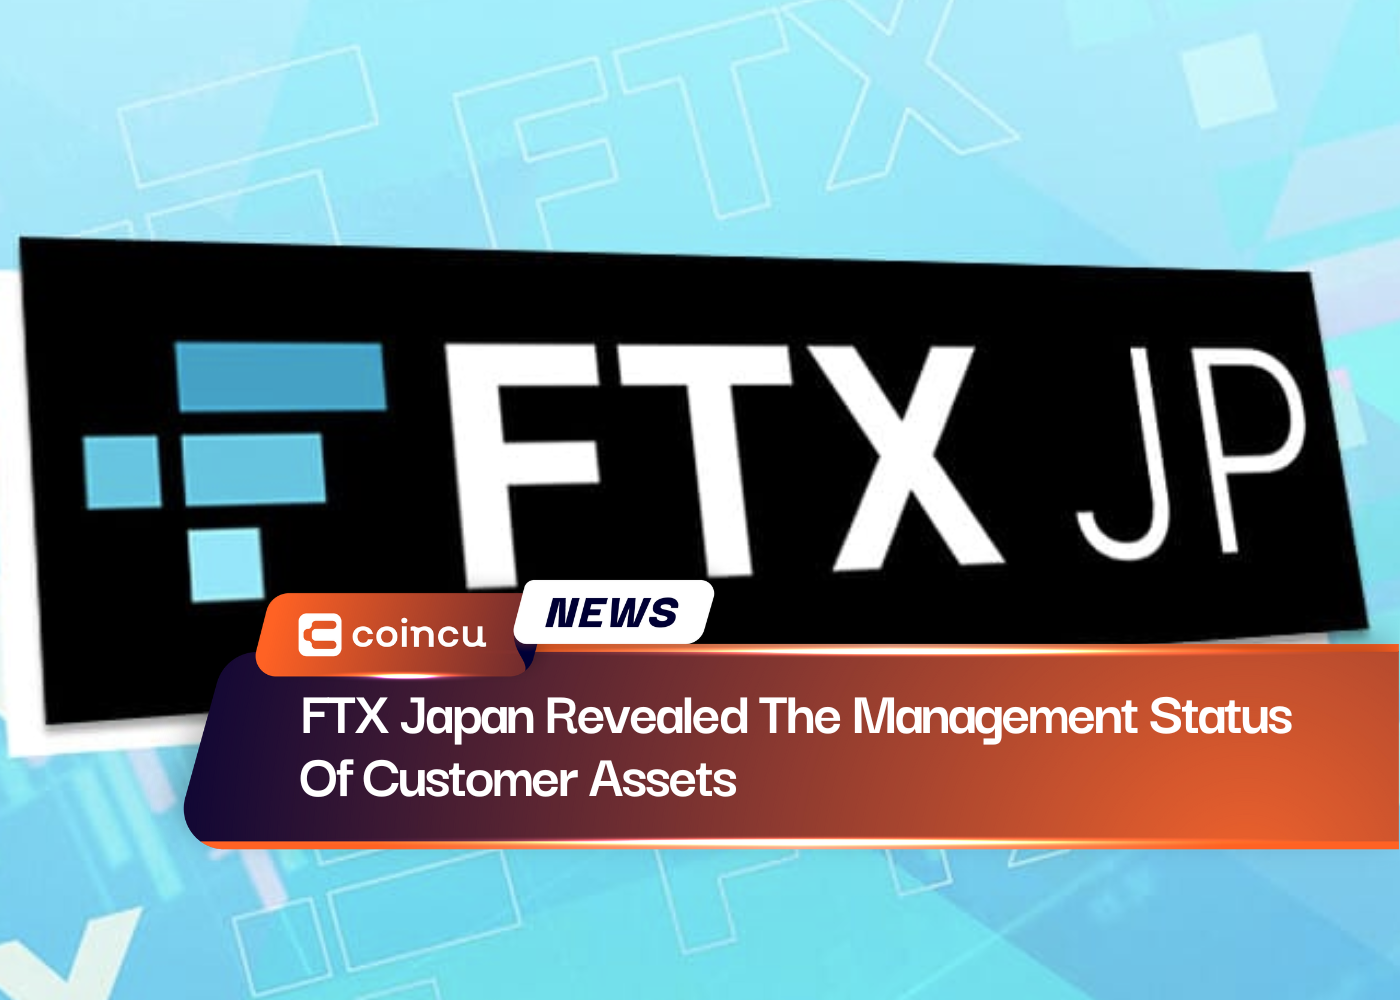 FTX Japan Revealed The Management Status Of Customer Assets